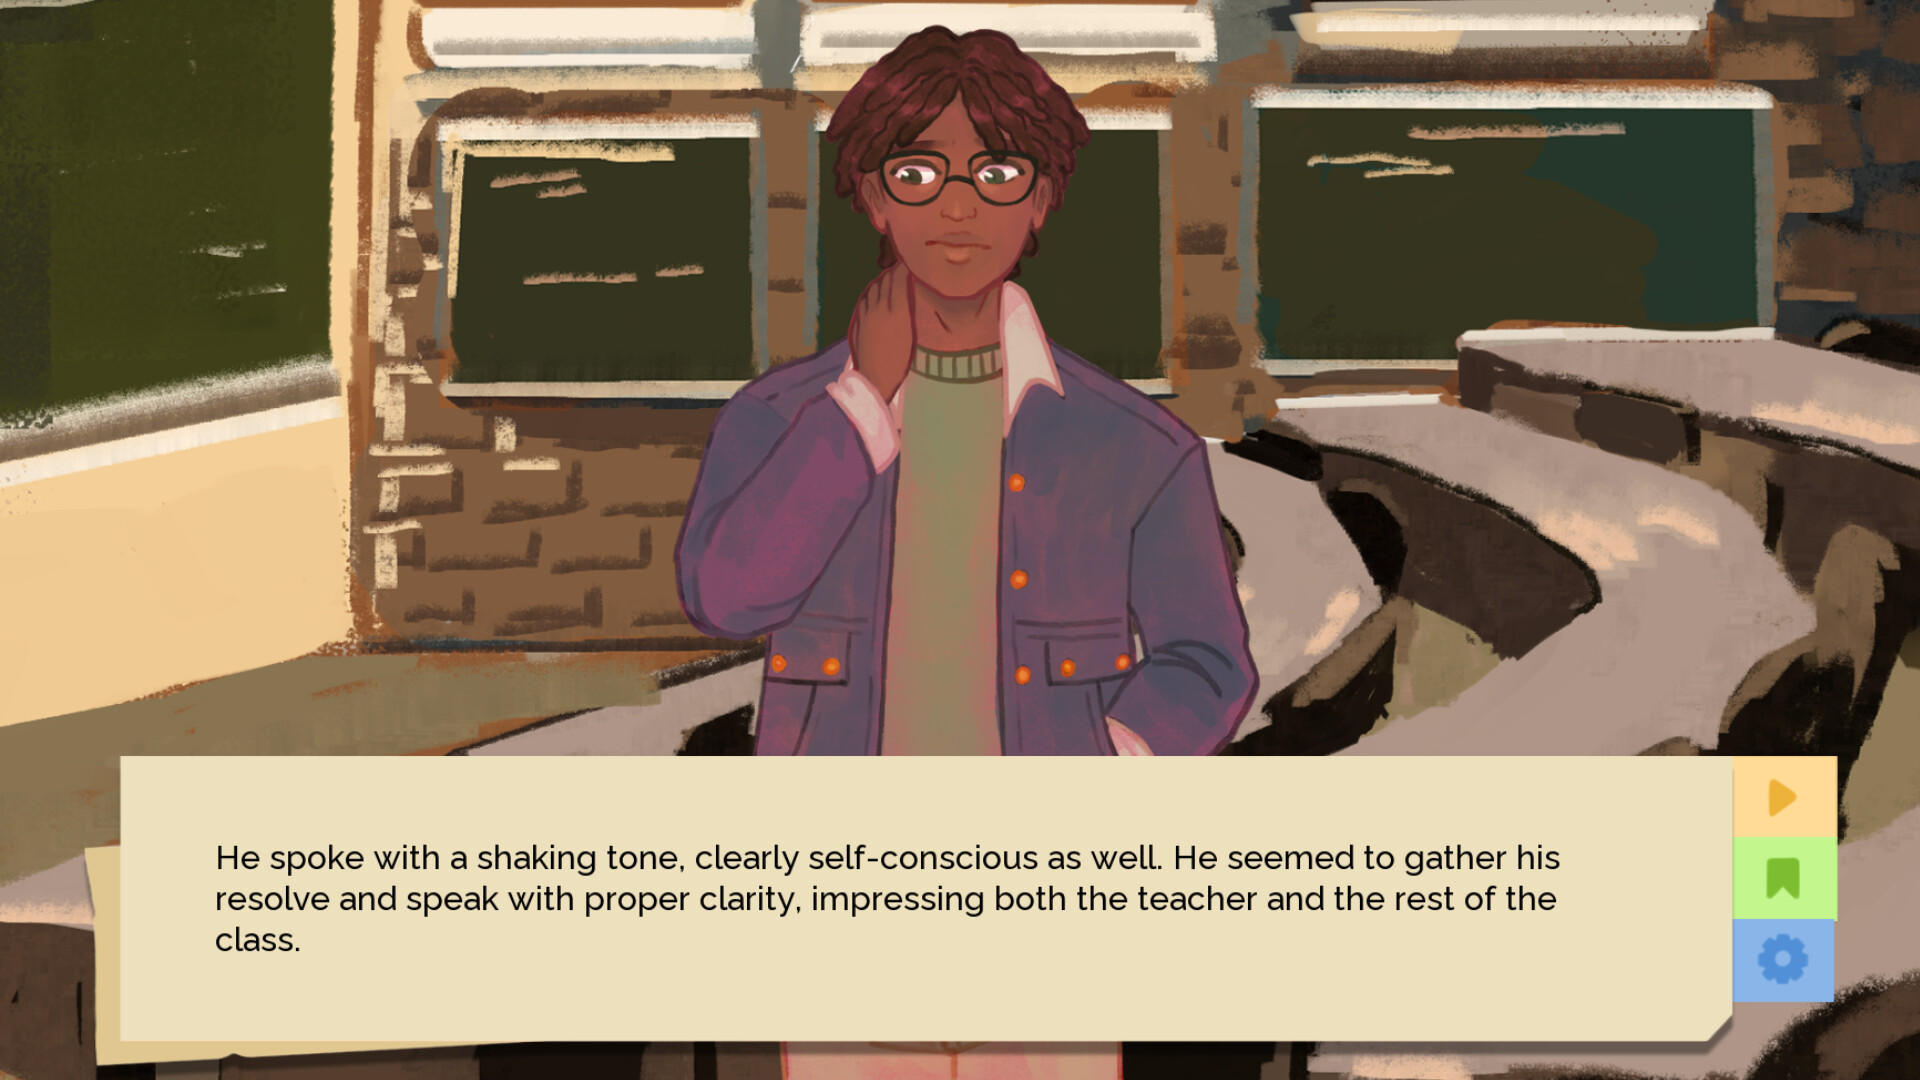 Rolling for Romance screenshot game